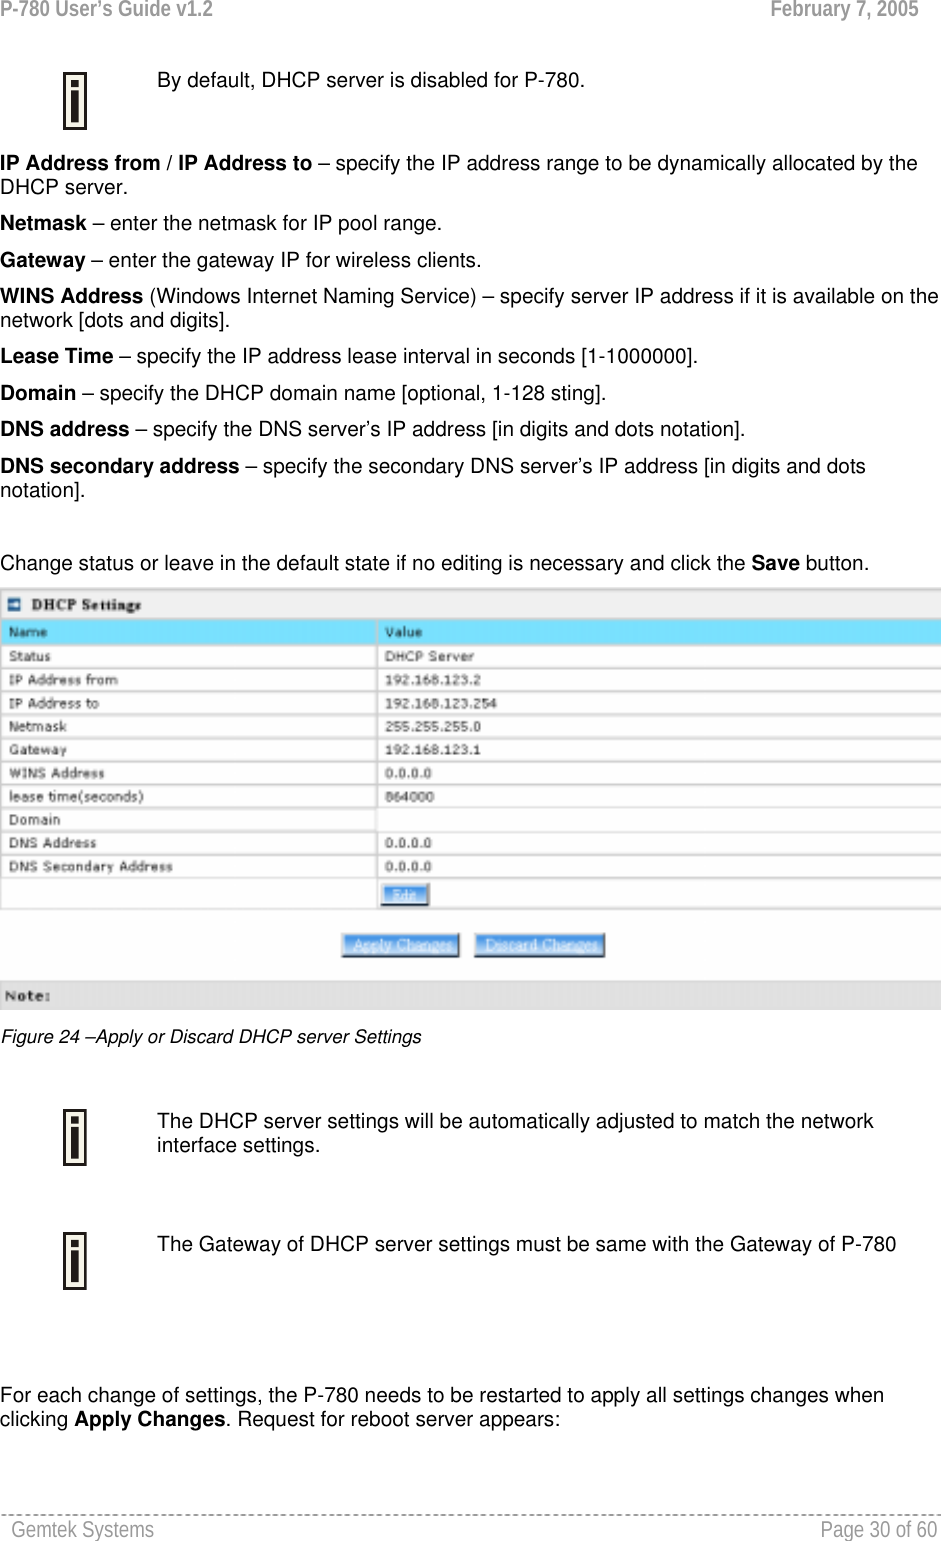 P-780 User’s Guide v1.2  February 7, 2005 Gemtek Systems    Page 30 of 60    By default, DHCP server is disabled for P-780. IP Address from / IP Address to – specify the IP address range to be dynamically allocated by the DHCP server. Netmask – enter the netmask for IP pool range.  Gateway – enter the gateway IP for wireless clients. WINS Address (Windows Internet Naming Service) – specify server IP address if it is available on the network [dots and digits].  Lease Time – specify the IP address lease interval in seconds [1-1000000].  Domain – specify the DHCP domain name [optional, 1-128 sting].  DNS address – specify the DNS server’s IP address [in digits and dots notation].  DNS secondary address – specify the secondary DNS server’s IP address [in digits and dots notation].  Change status or leave in the default state if no editing is necessary and click the Save button.   Figure 24 –Apply or Discard DHCP server Settings   The DHCP server settings will be automatically adjusted to match the network interface settings.   The Gateway of DHCP server settings must be same with the Gateway of P-780   For each change of settings, the P-780 needs to be restarted to apply all settings changes when clicking Apply Changes. Request for reboot server appears: 